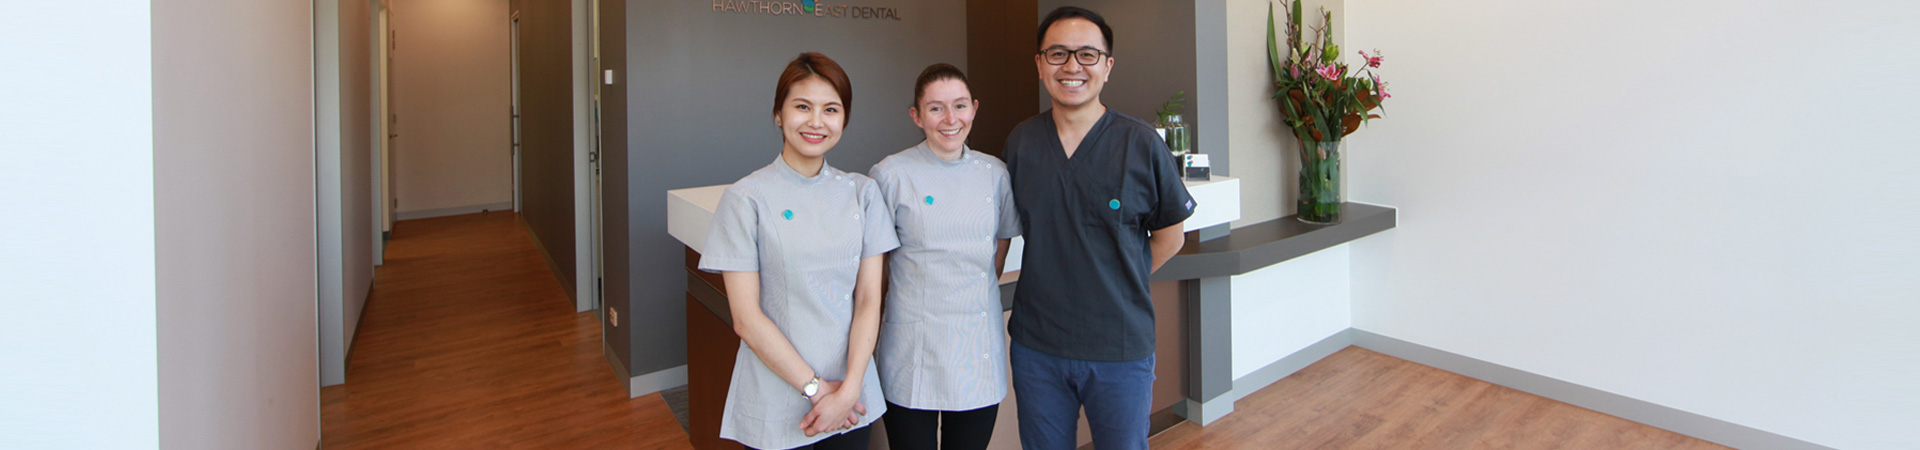 Tips to Find Best Dentist in Melbourne For You